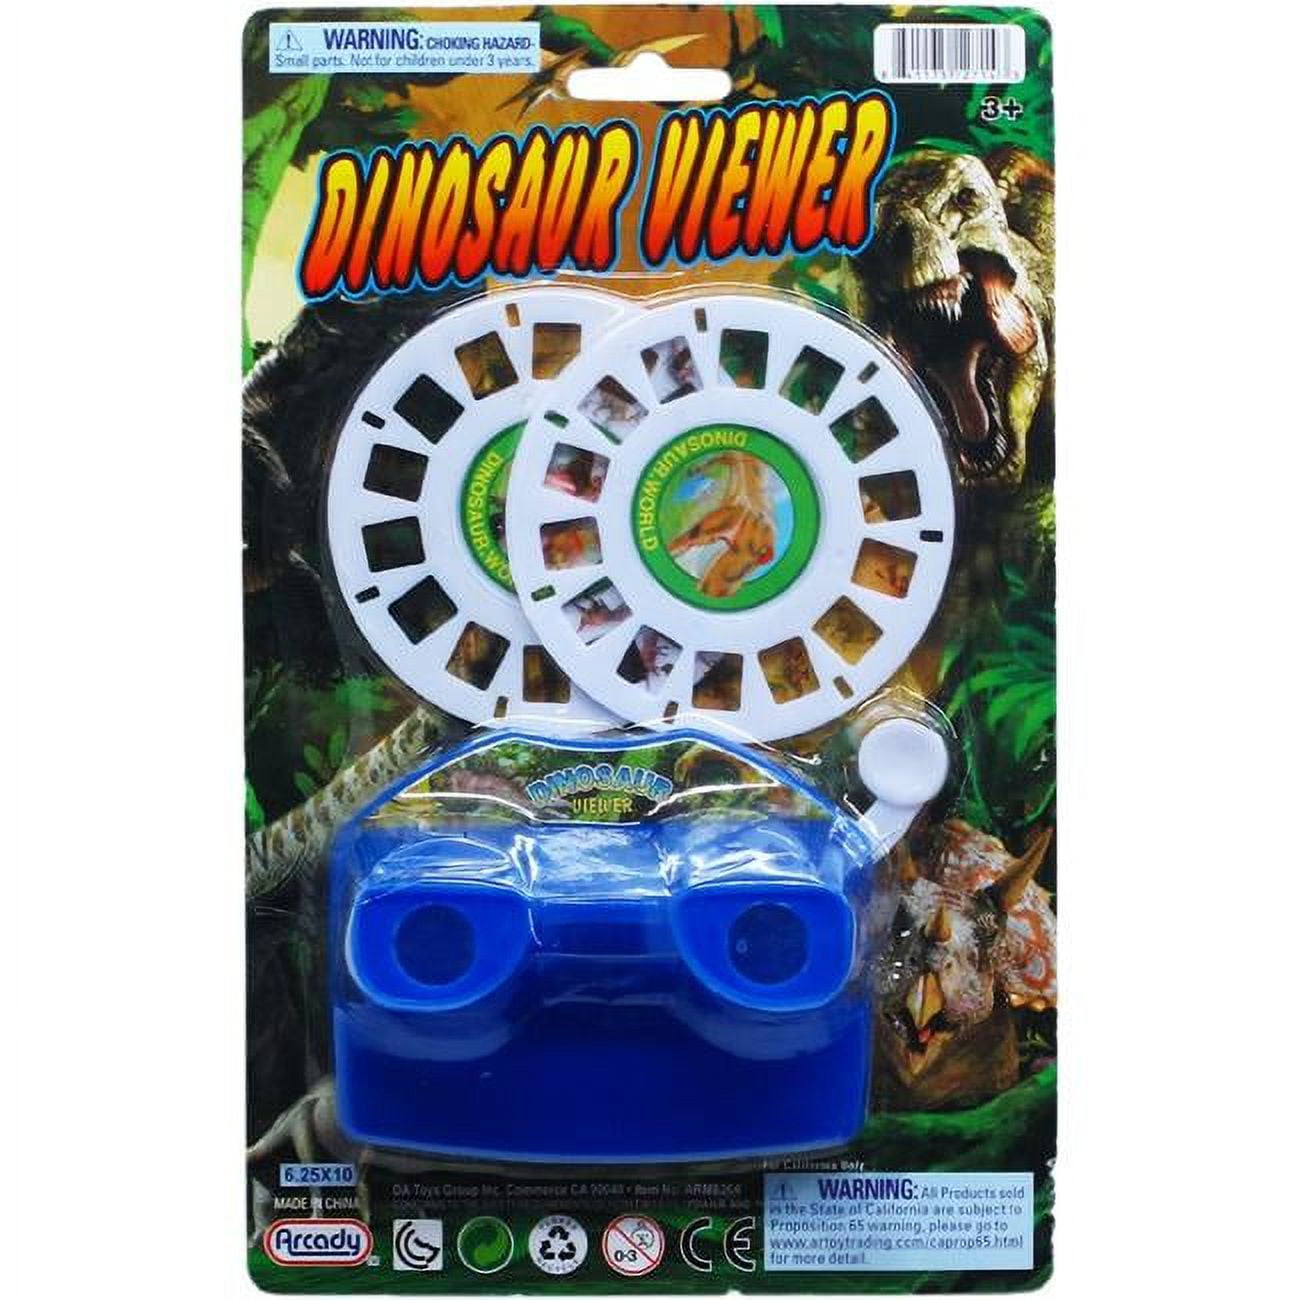 Picture of DDI 2339732 Dinosaur Viewer with 2 Film Discs Case of 48